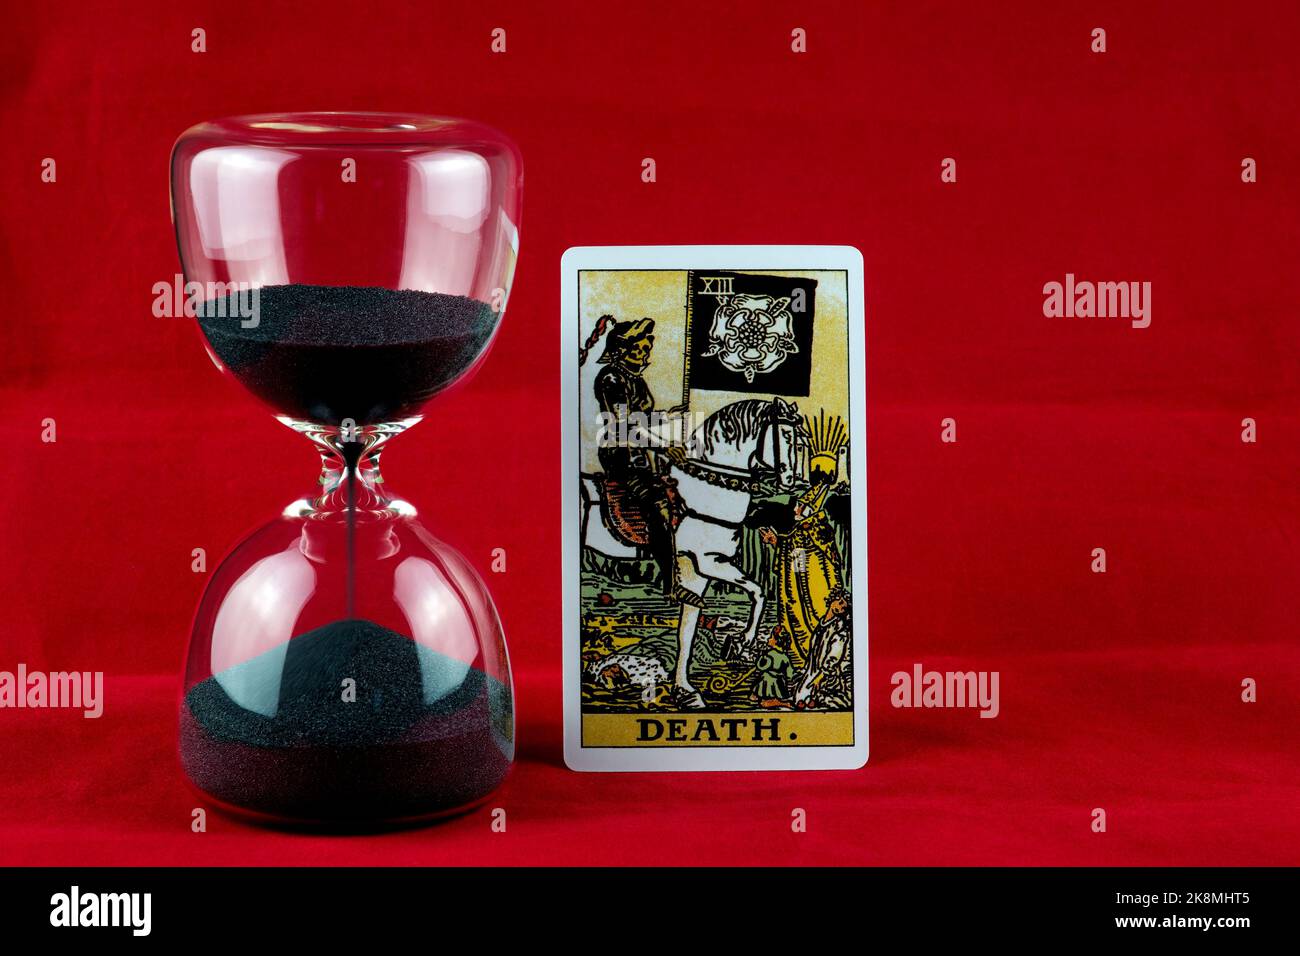 Death tarot card and hourglass on a red background Stock Photo